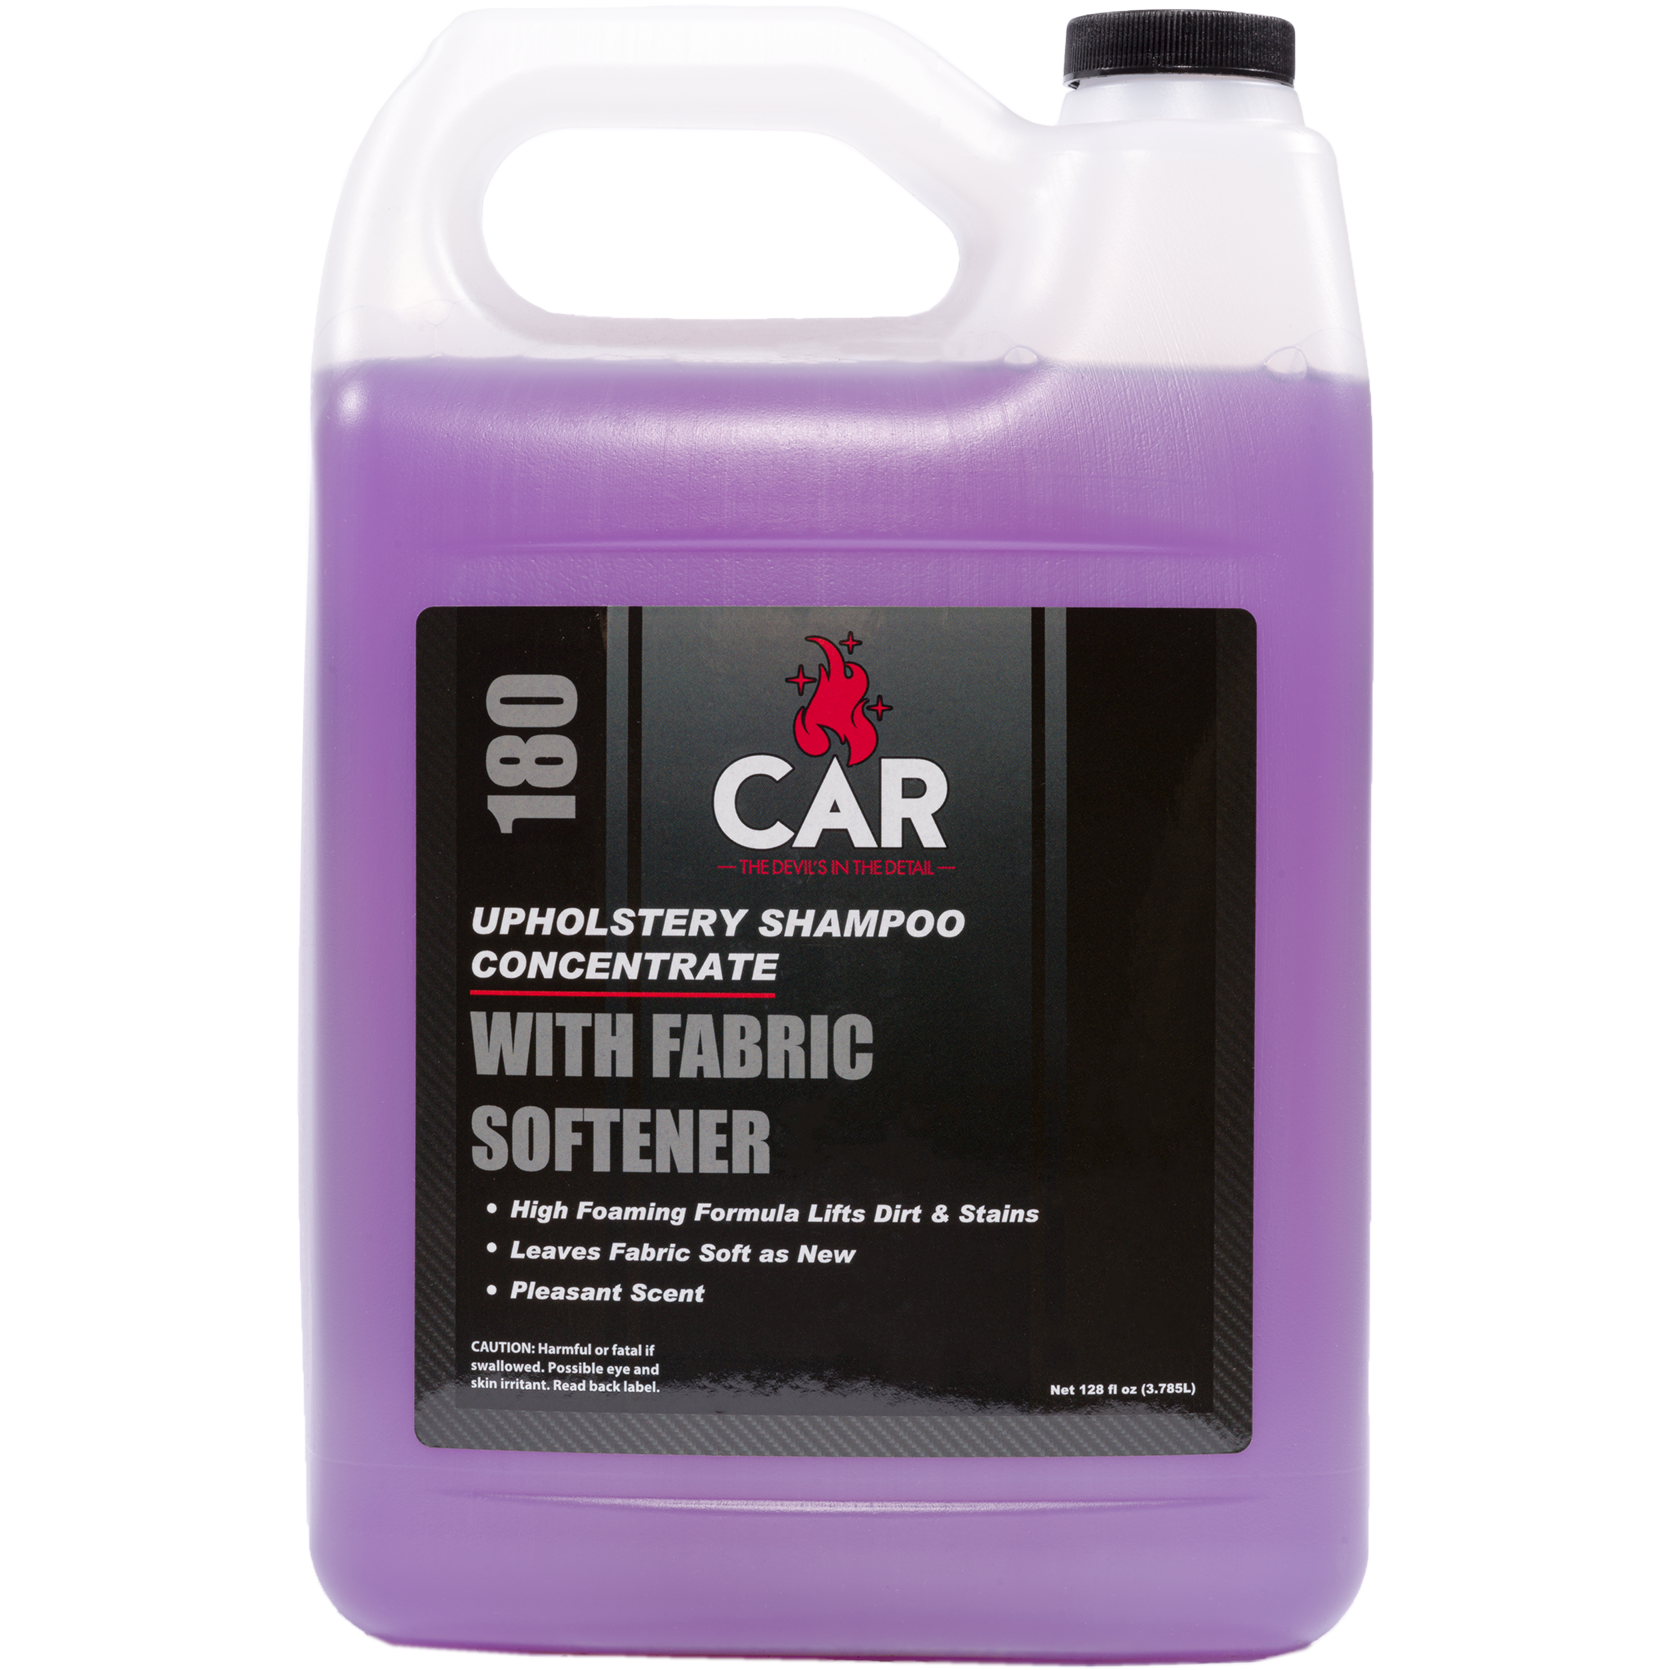 XCP CAR-18001 CAR Products Upholstery Shampoo Concentrate w/ "RM" Fabric Softener (1 gal)